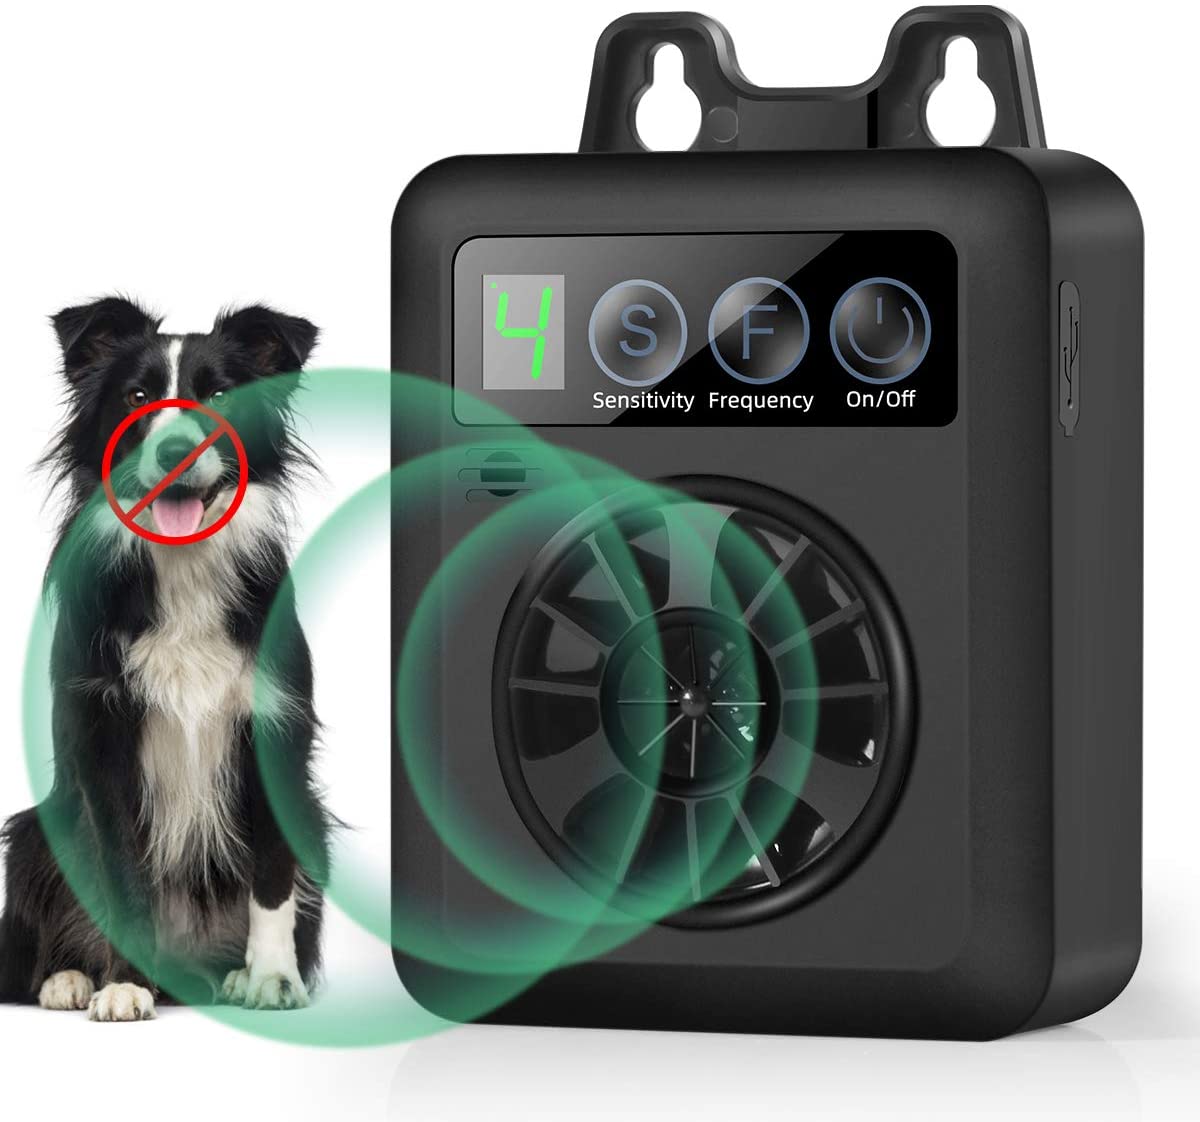 Anti Barking Device Bark Control Device - Stop Your Neighbors Dog from